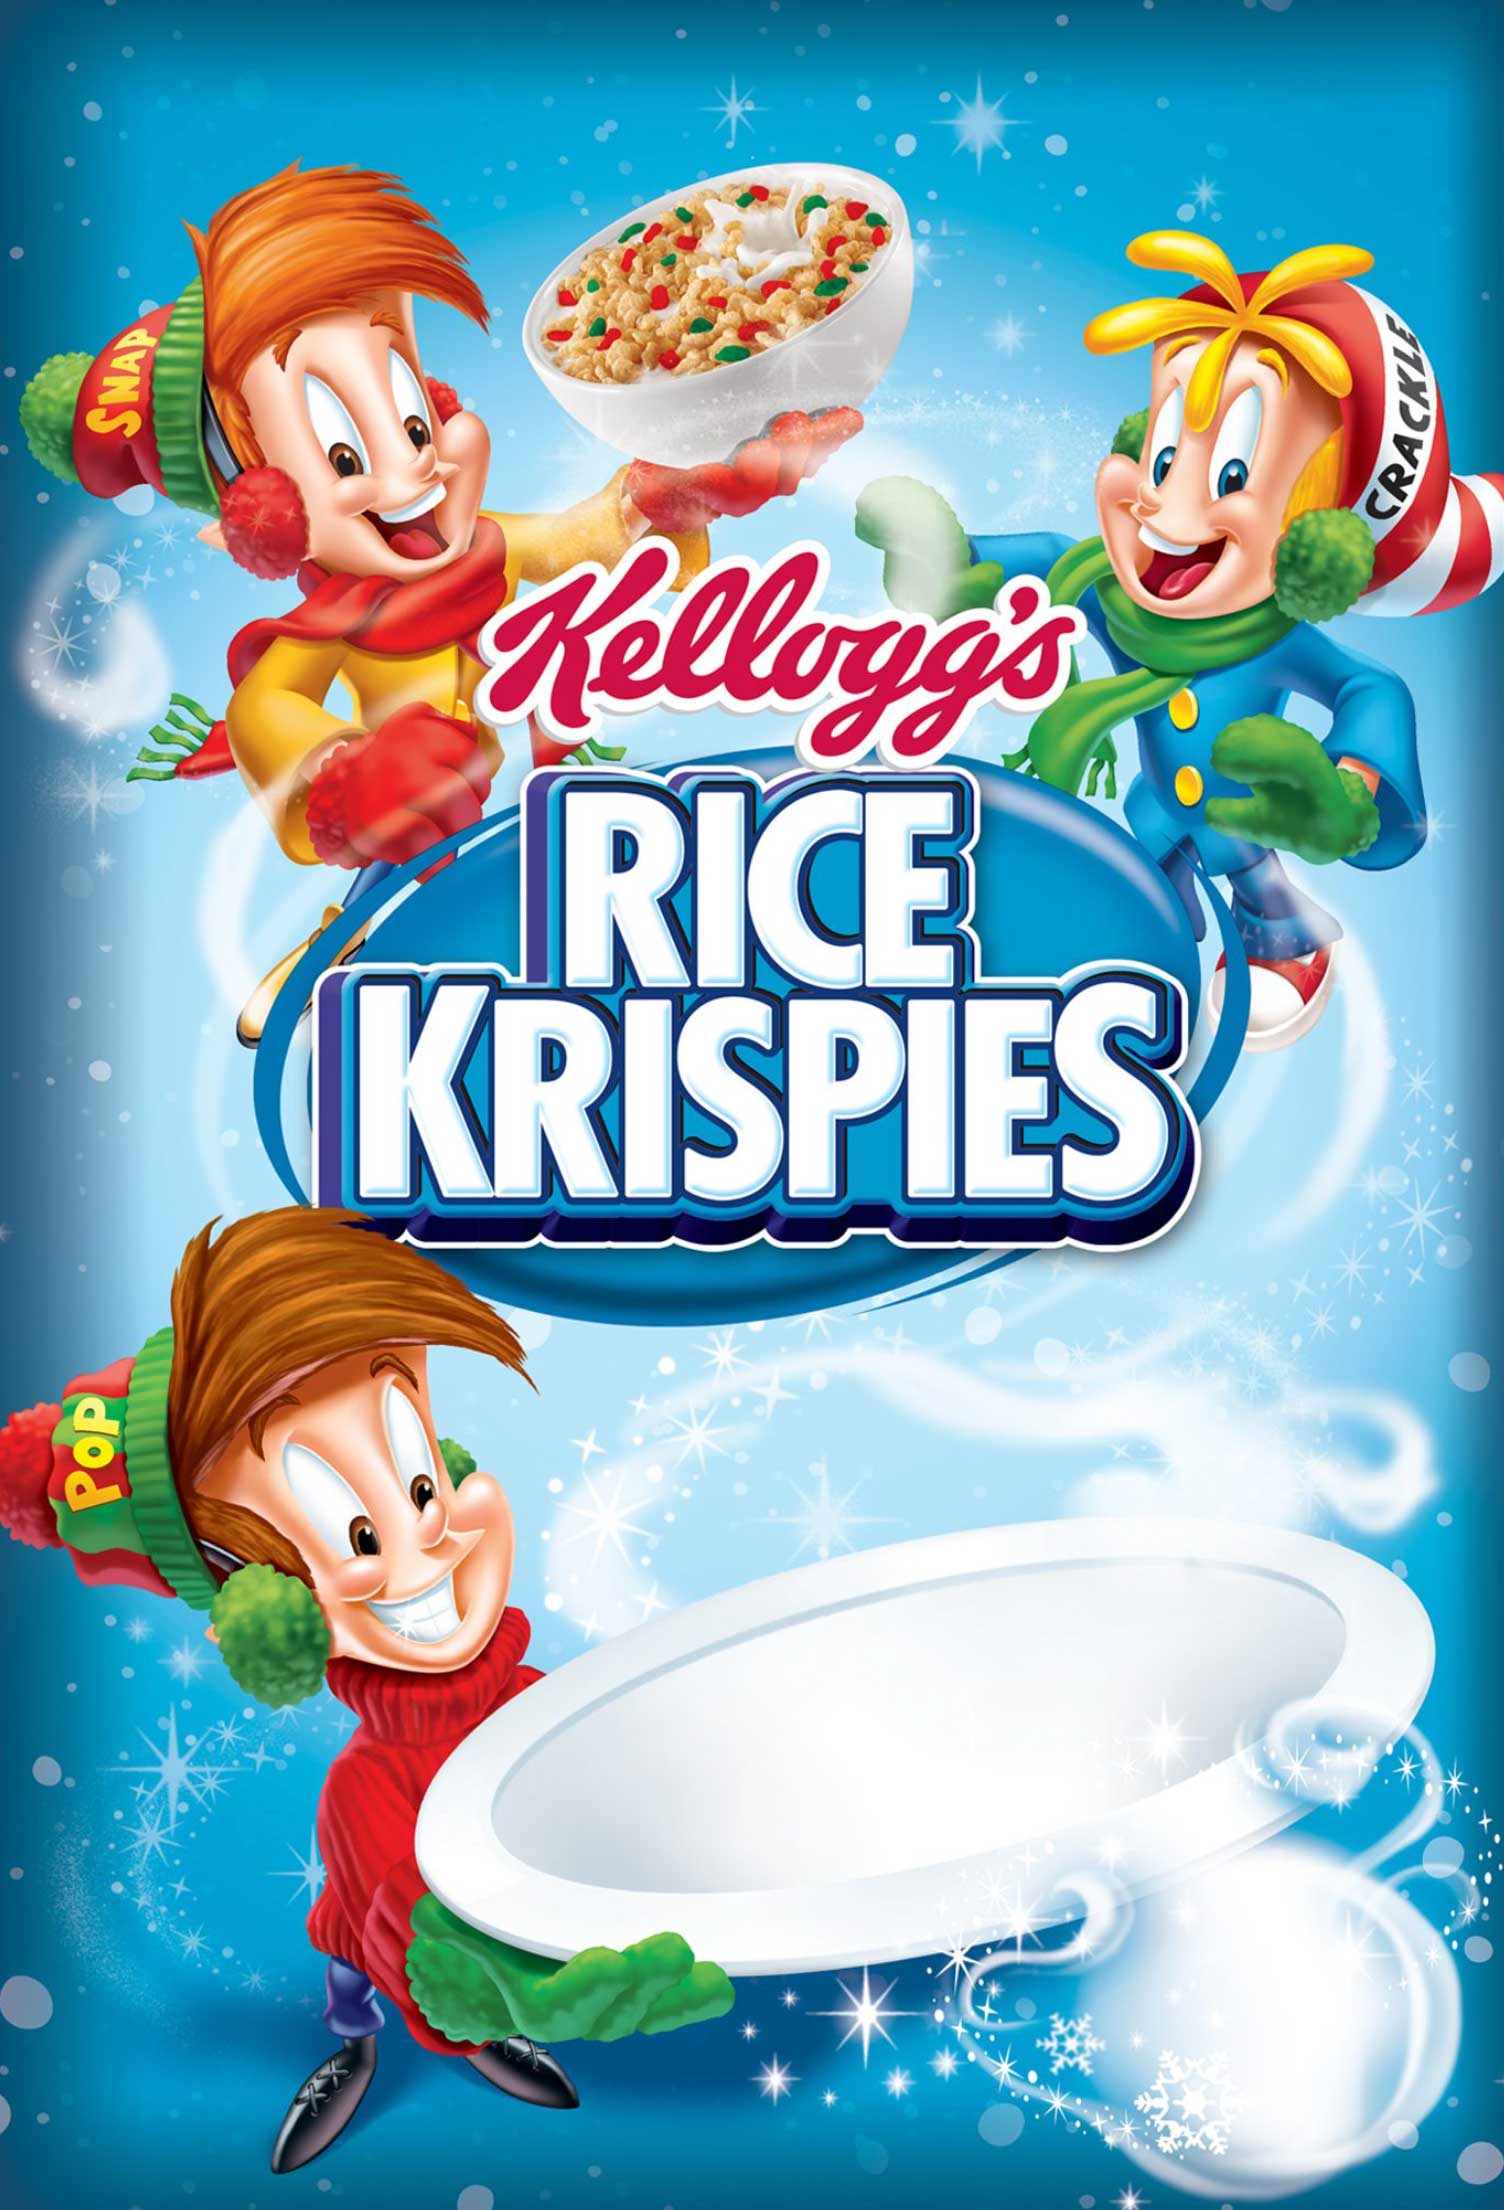 Rice-Krispies-Cereal-with-Bowl-and-Elves